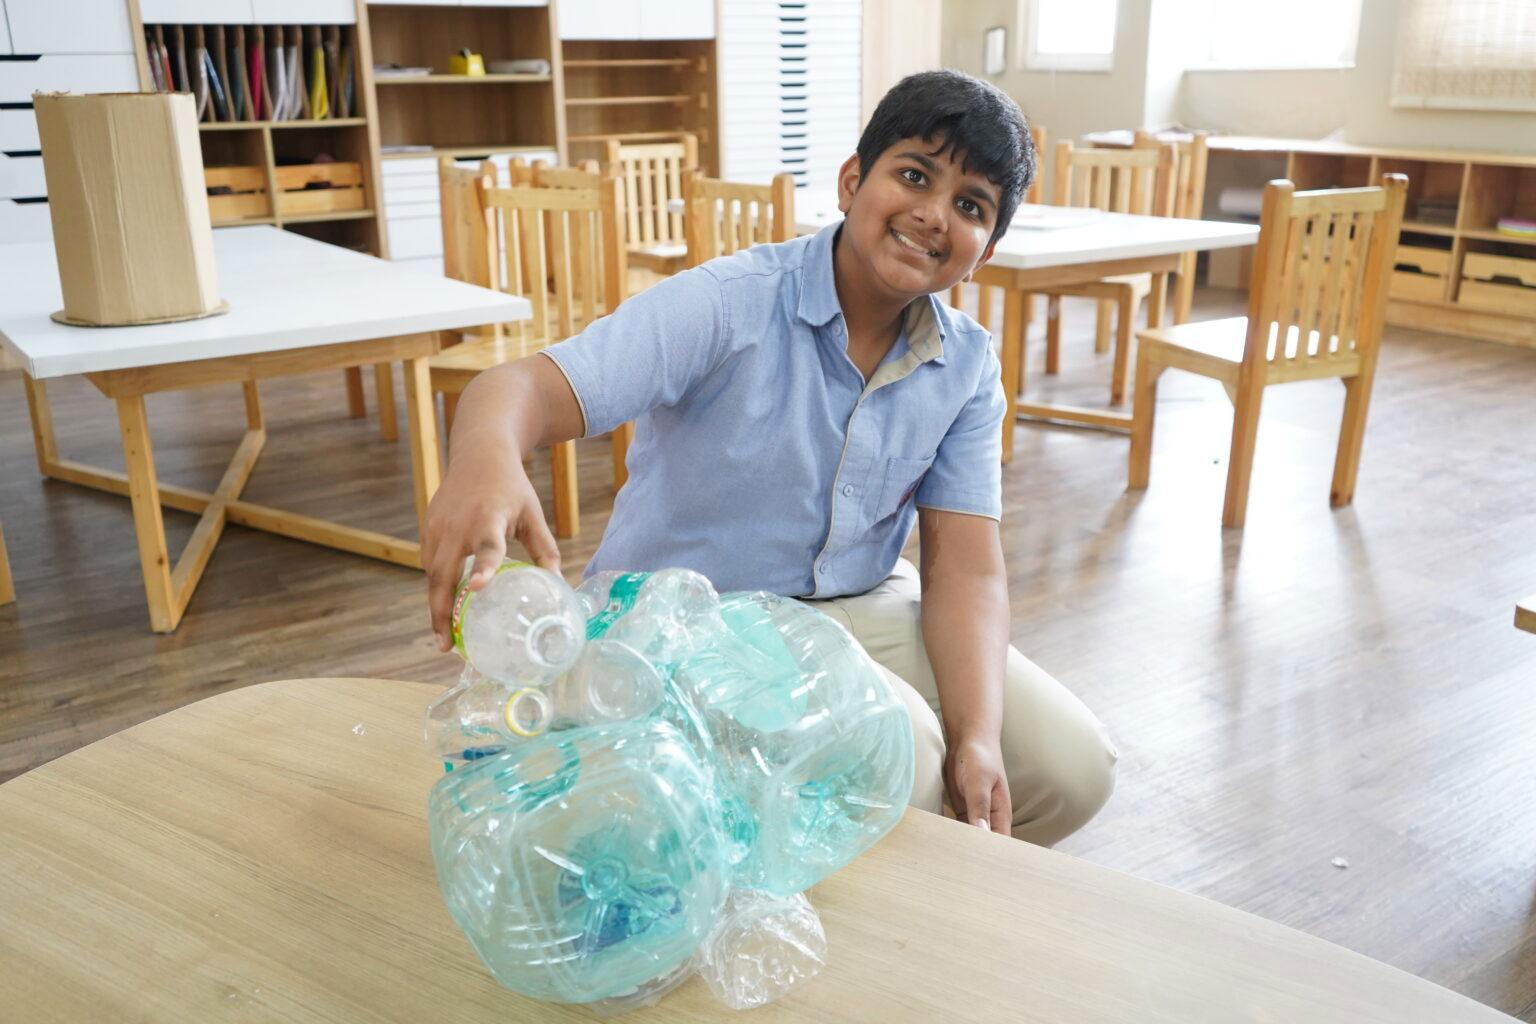 A primary student at Prometheus School is engaged in a project aimed at recycling plastic bottles.